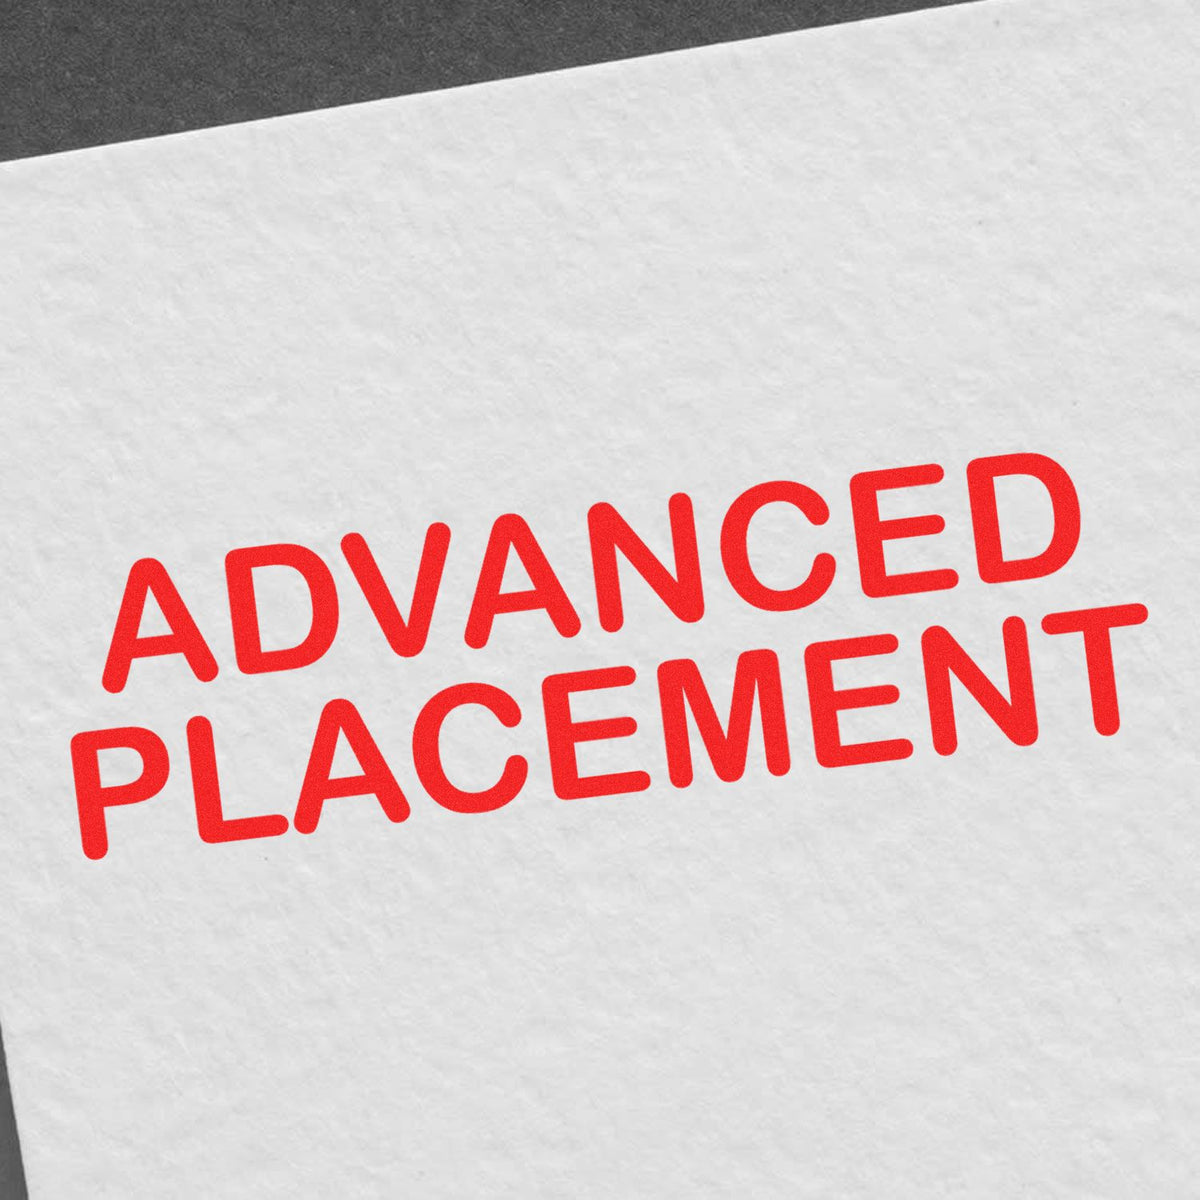 Advanced Placement Rubber Stamp In Use Photo